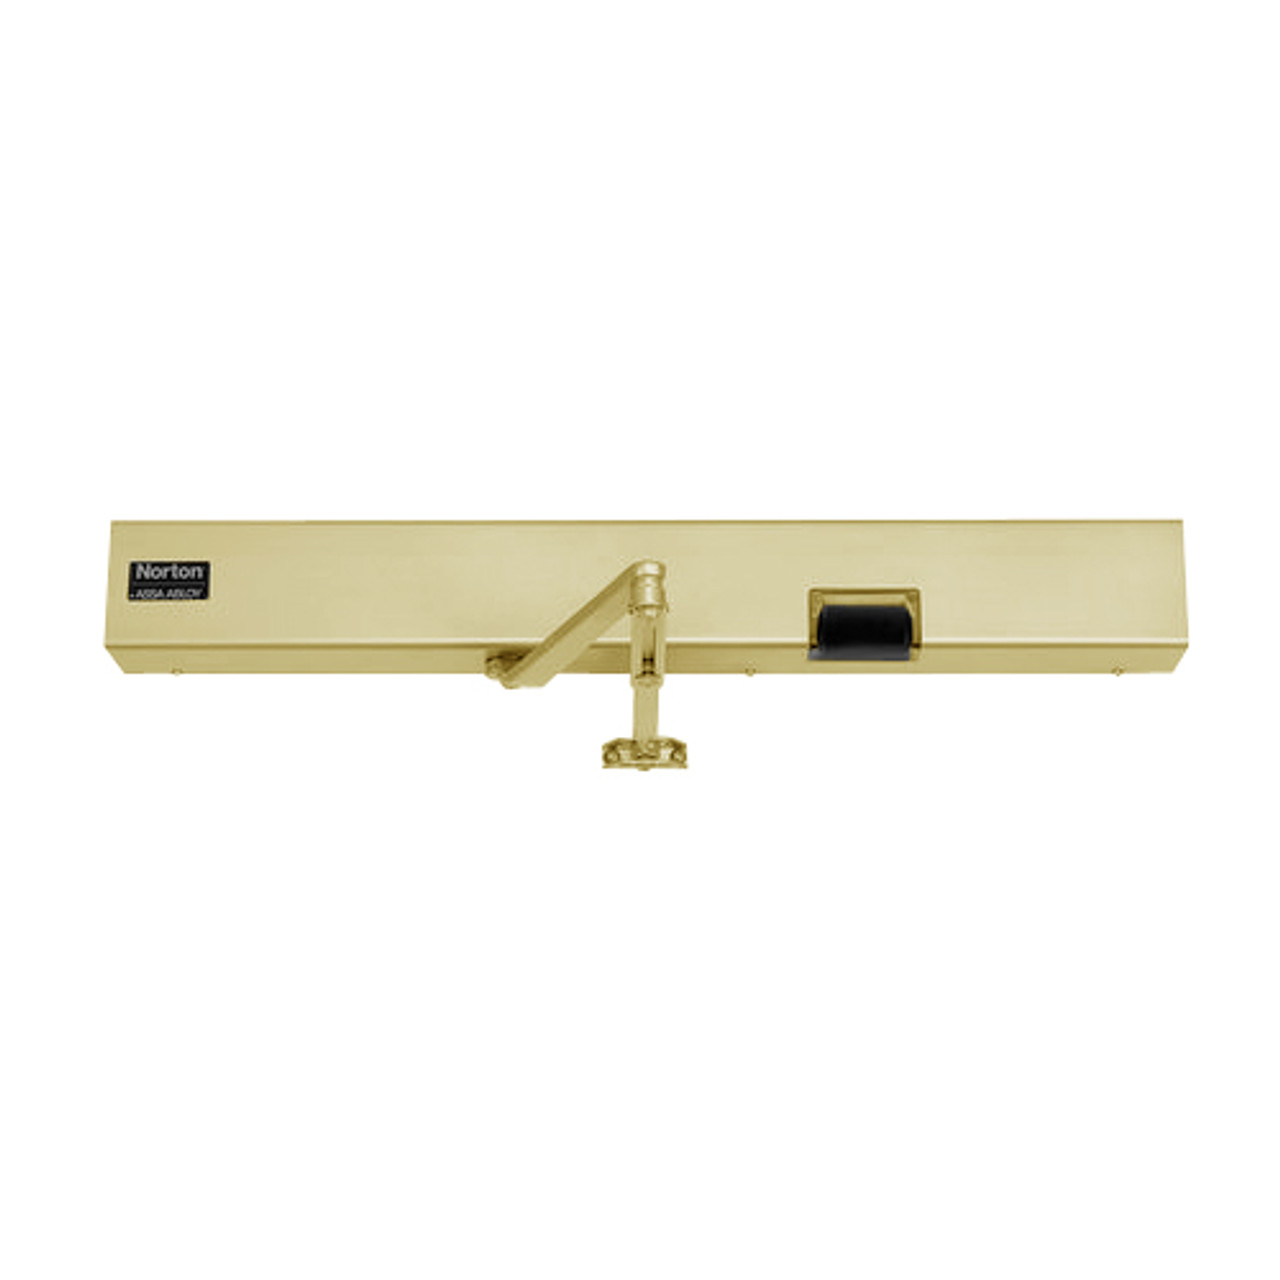 7124SZ-RH-120VAC-696 Norton 7100SZ Series Safe Zone Multi-Point Closer/Holder with Motion Sensor and Push Side Double Lever 11 inch Main Arm in Gold Finish